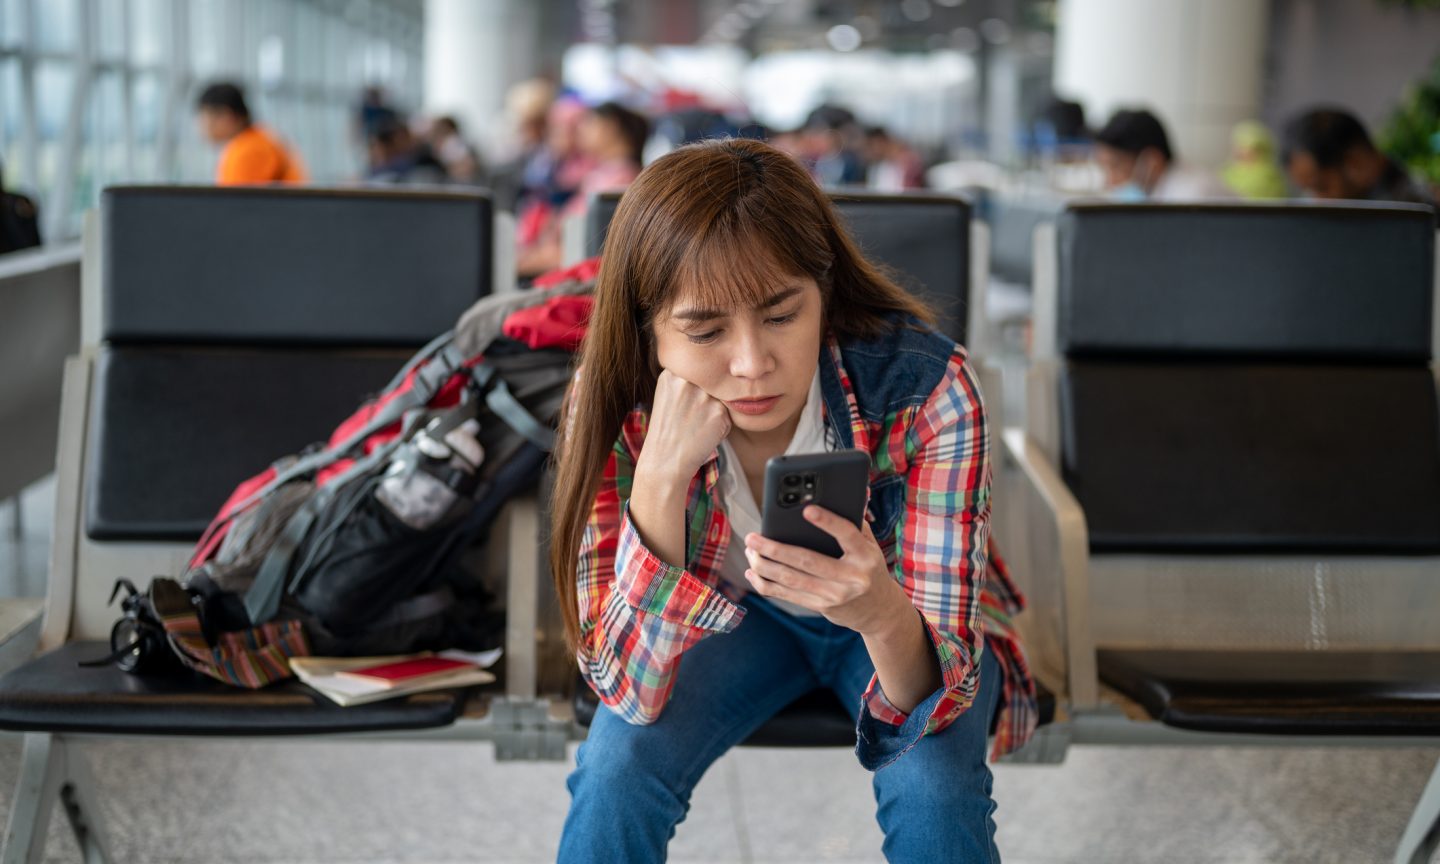 Why Is My Flight Delayed? 10 Causes For Flight Delays And Cancellations